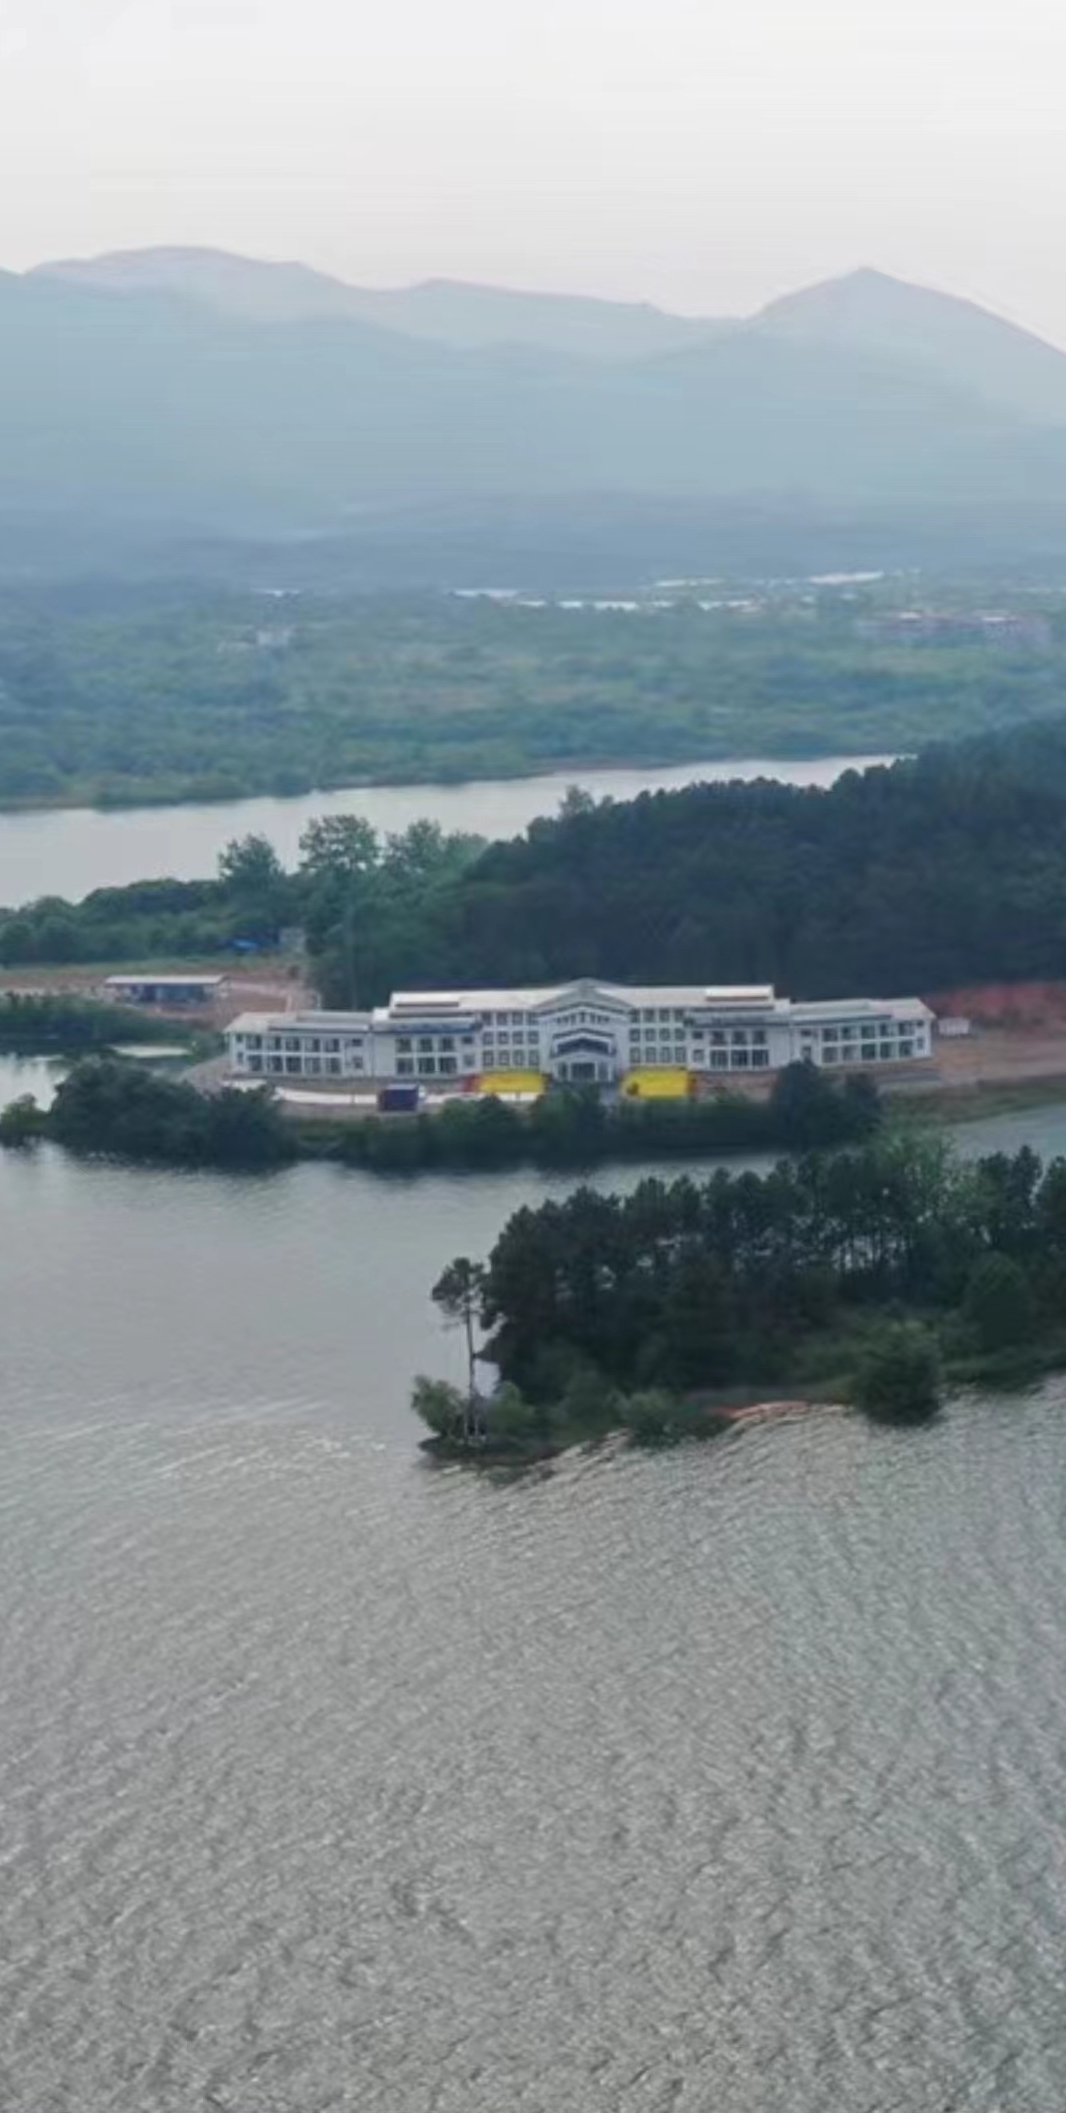 Hubei Archaeological Museum is located in the beautiful Mulan Lake Scenic Area